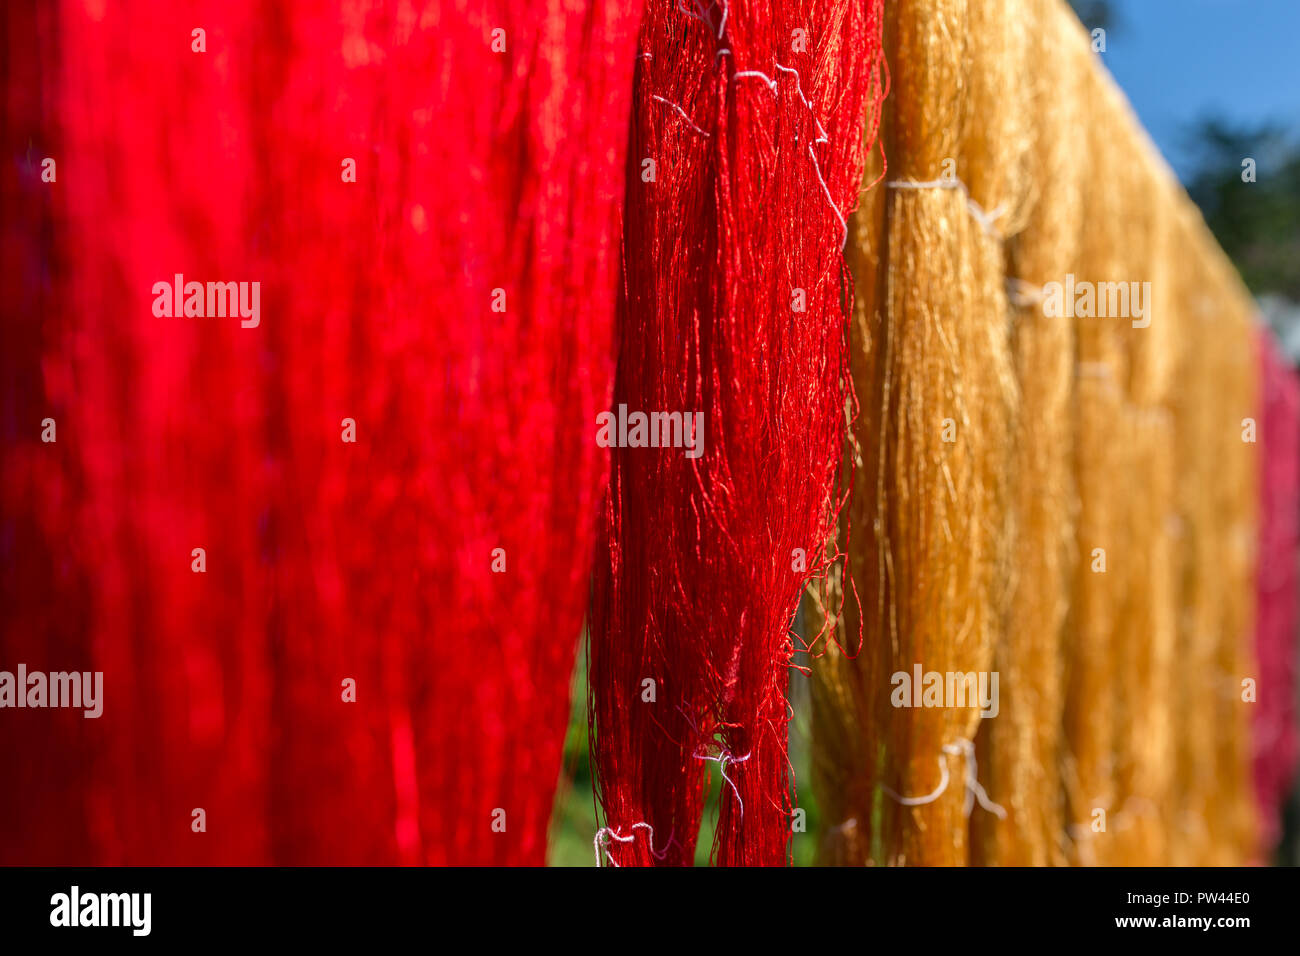 Colorful fabric hanging to dry after traditional dye processs in Luang Prabang, Laos. Silk production factory. Traditional manufacturing in Asia. Stock Photo